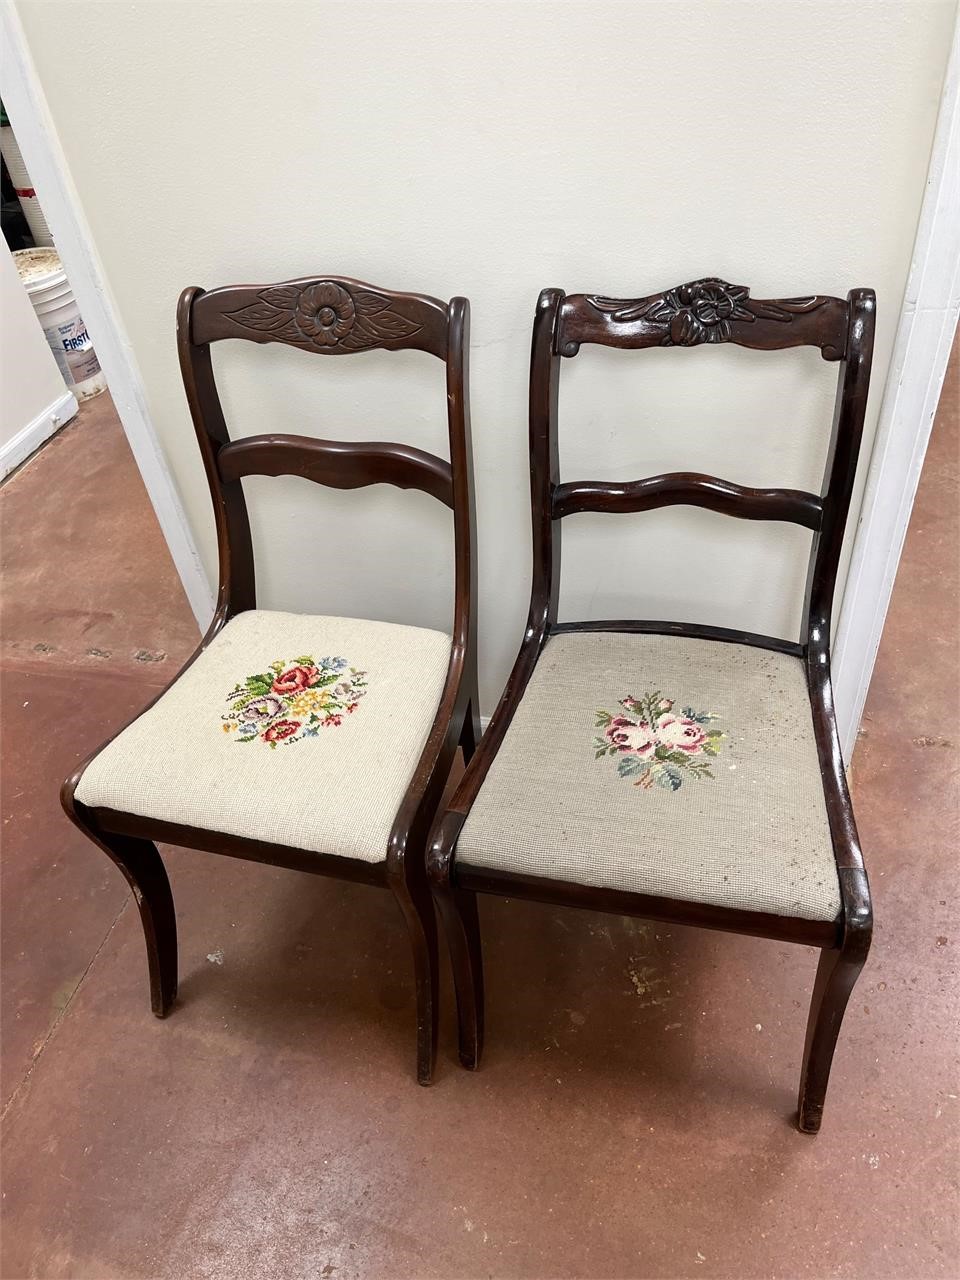 Two chairs with stitched seats B